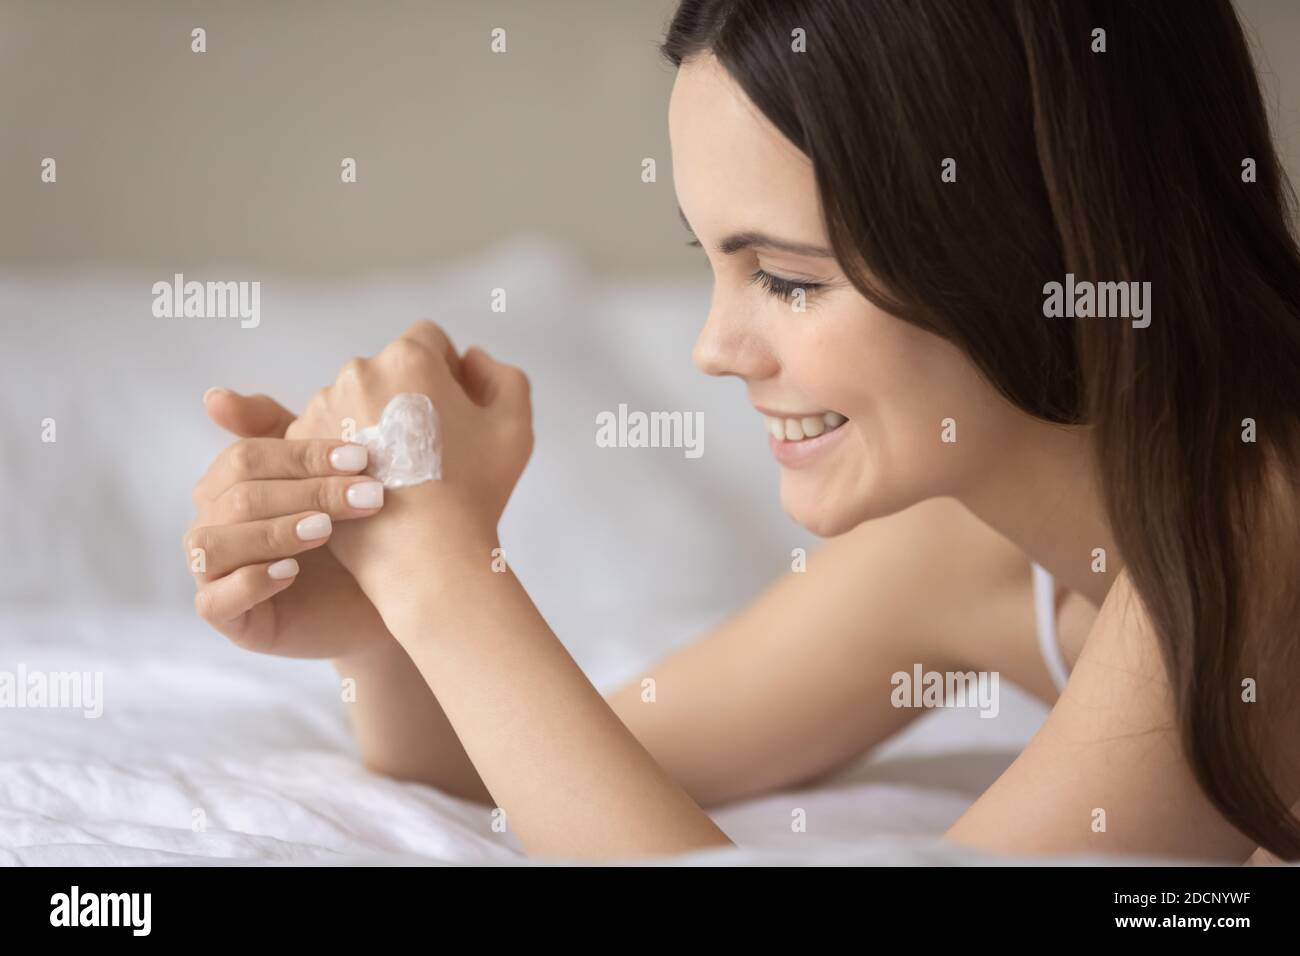 Content young woman enjoying beauty care applying lotion on hand Stock Photo